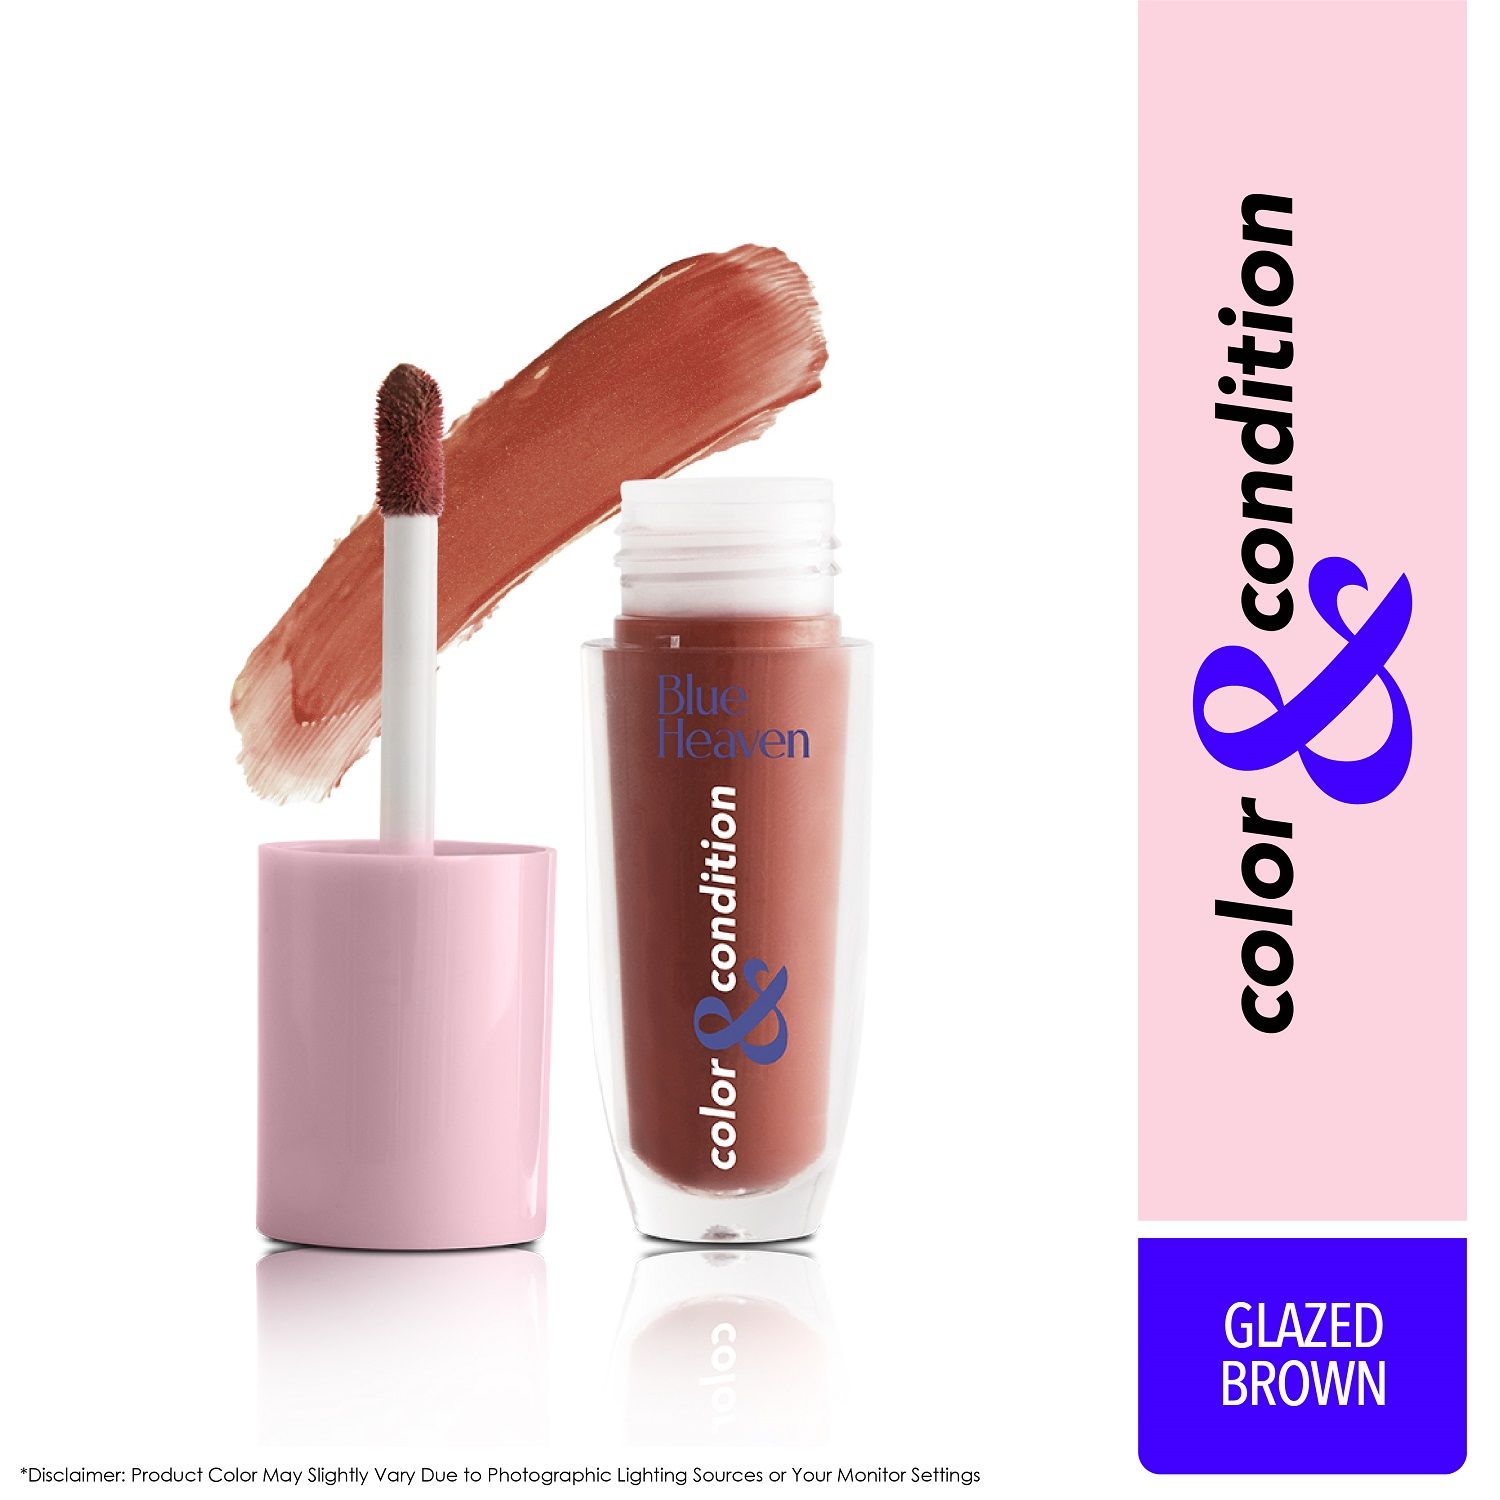 Buy Blue Heaven Color & Condition tinted lip oil for women, lip gloss infused with Cranberry, Raspberry & Hazelnut oil, Hydrating & Softening - Glazed Brown, 4.2ml - Purplle